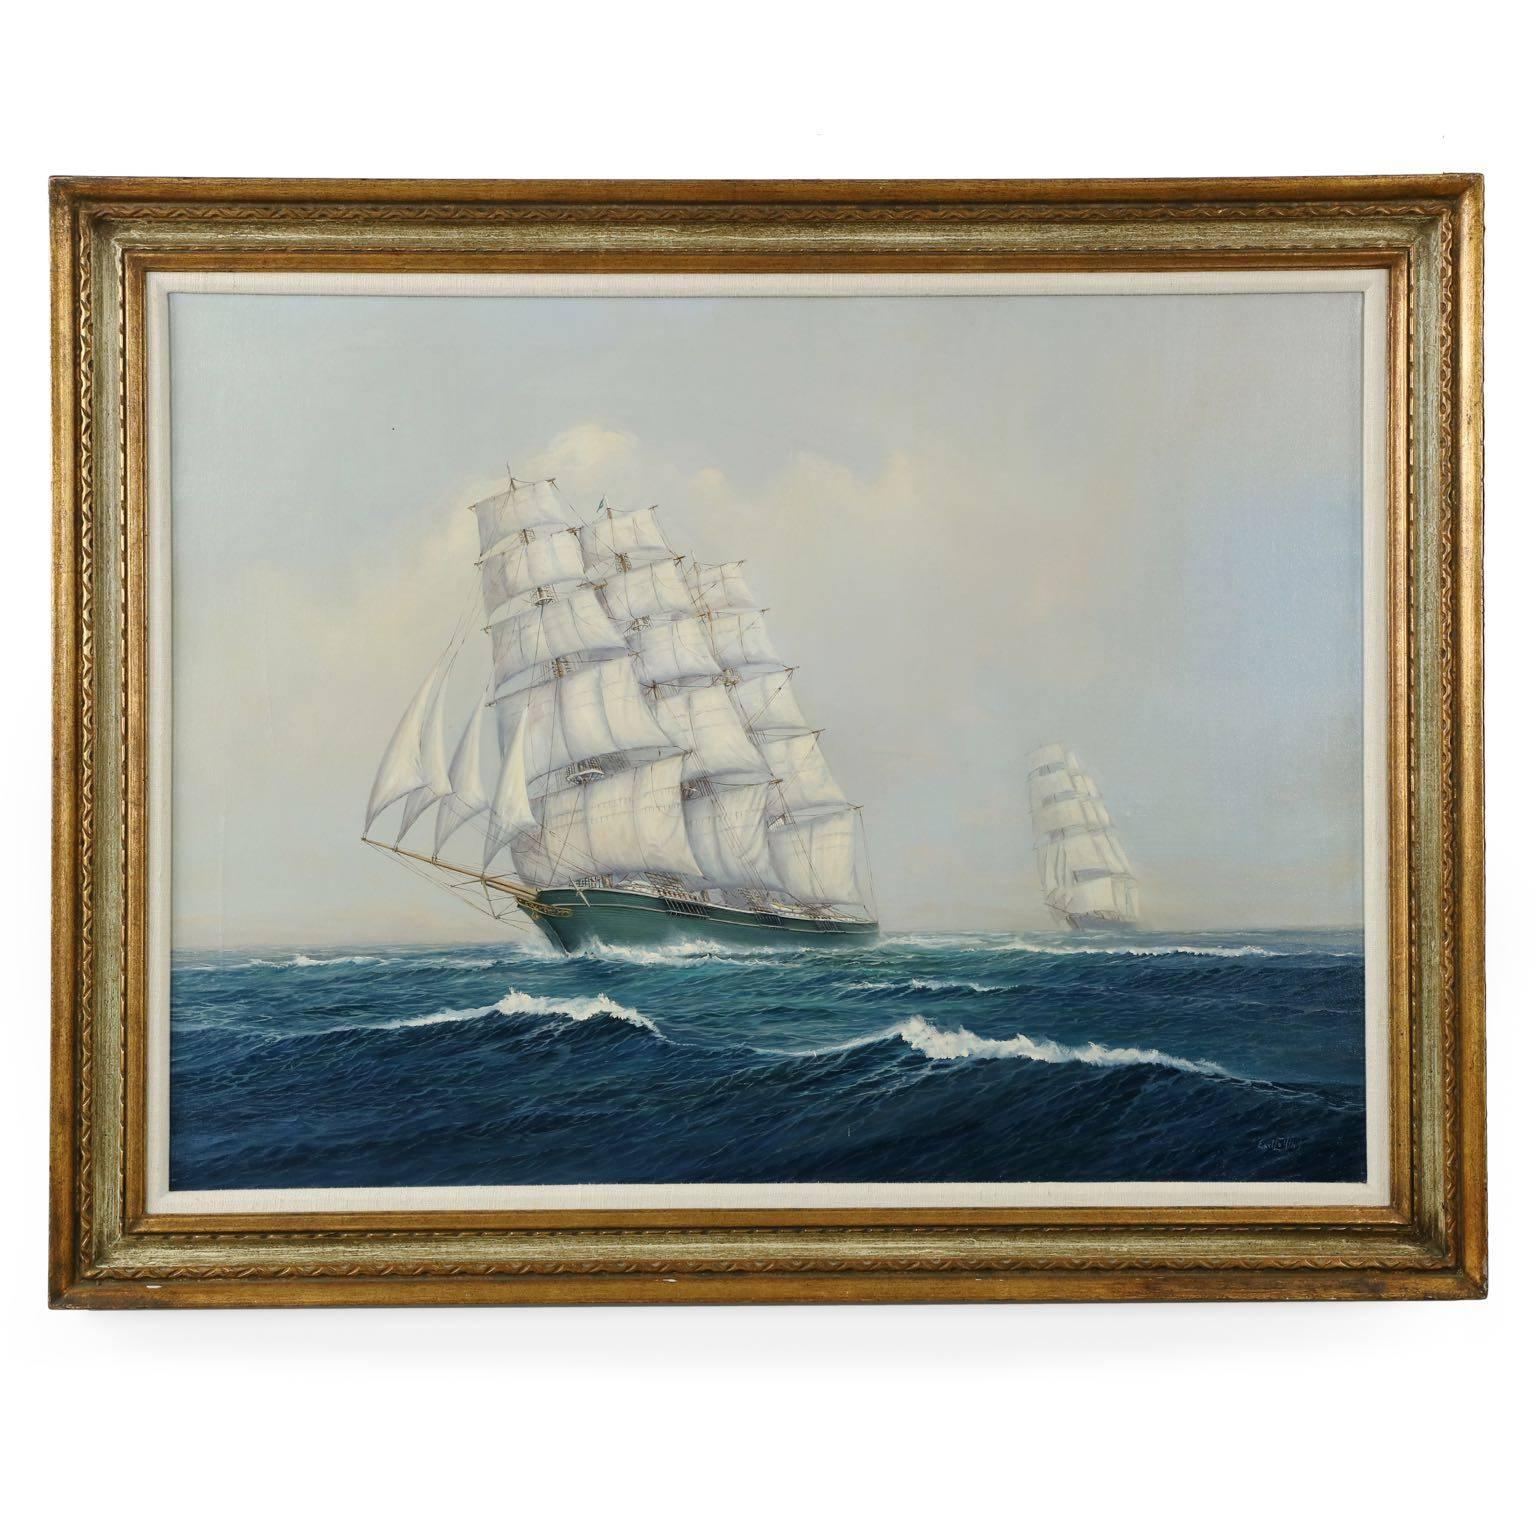 Earl Collins Nautical Marine Oil Painting on Canvas, "Clipper Northern Eagle"